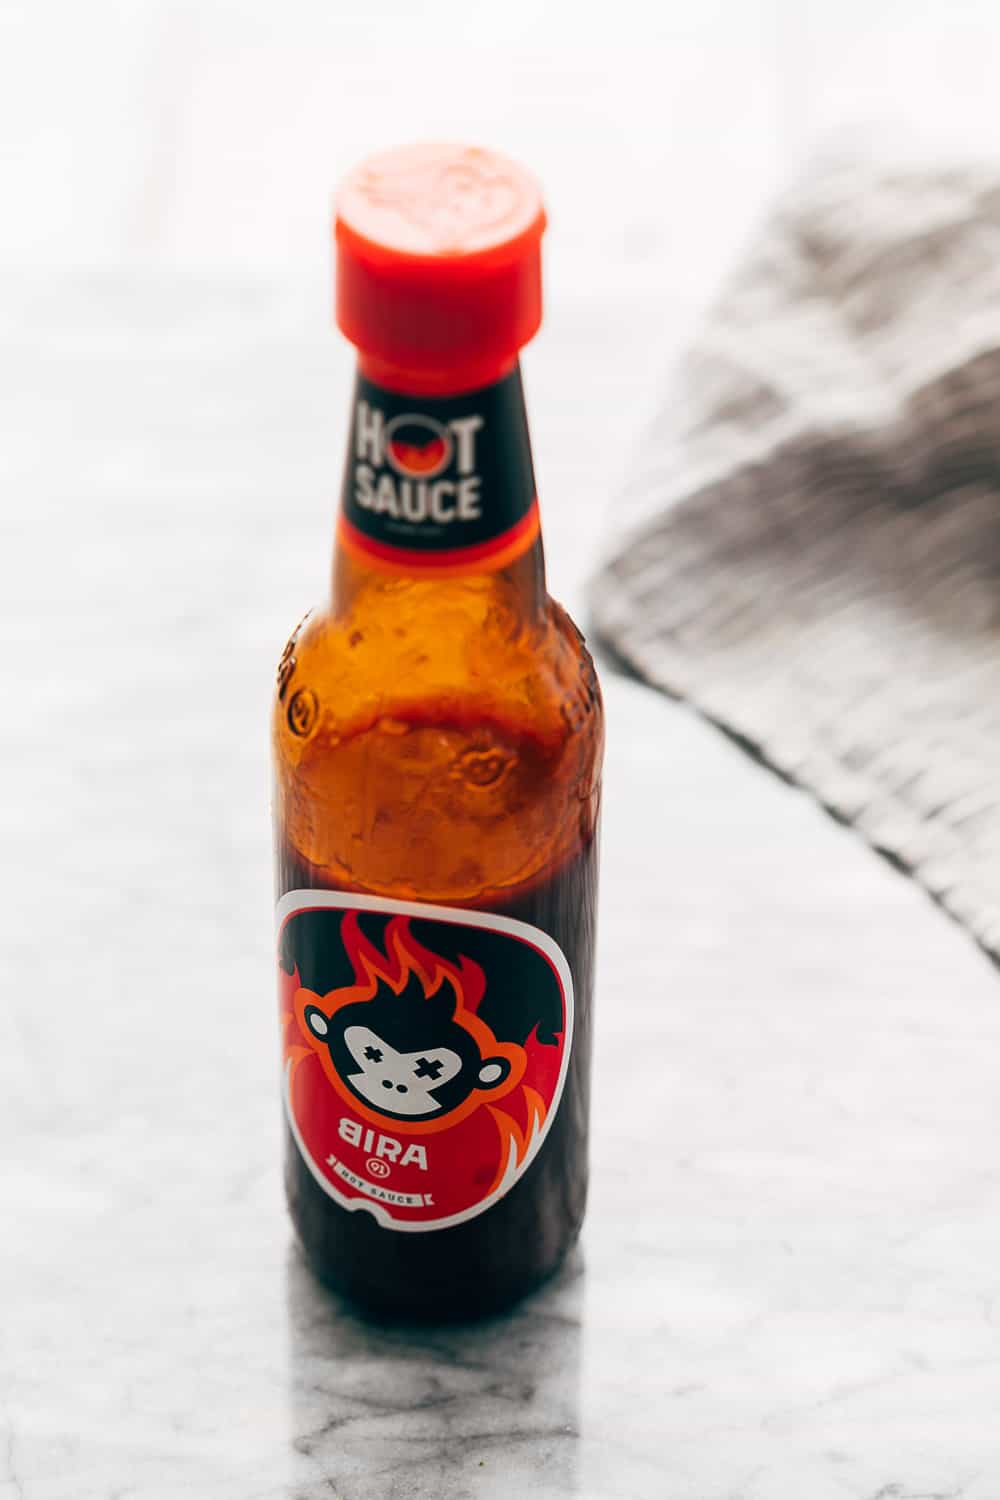 Picture of Bira's hot sauce on the countertop